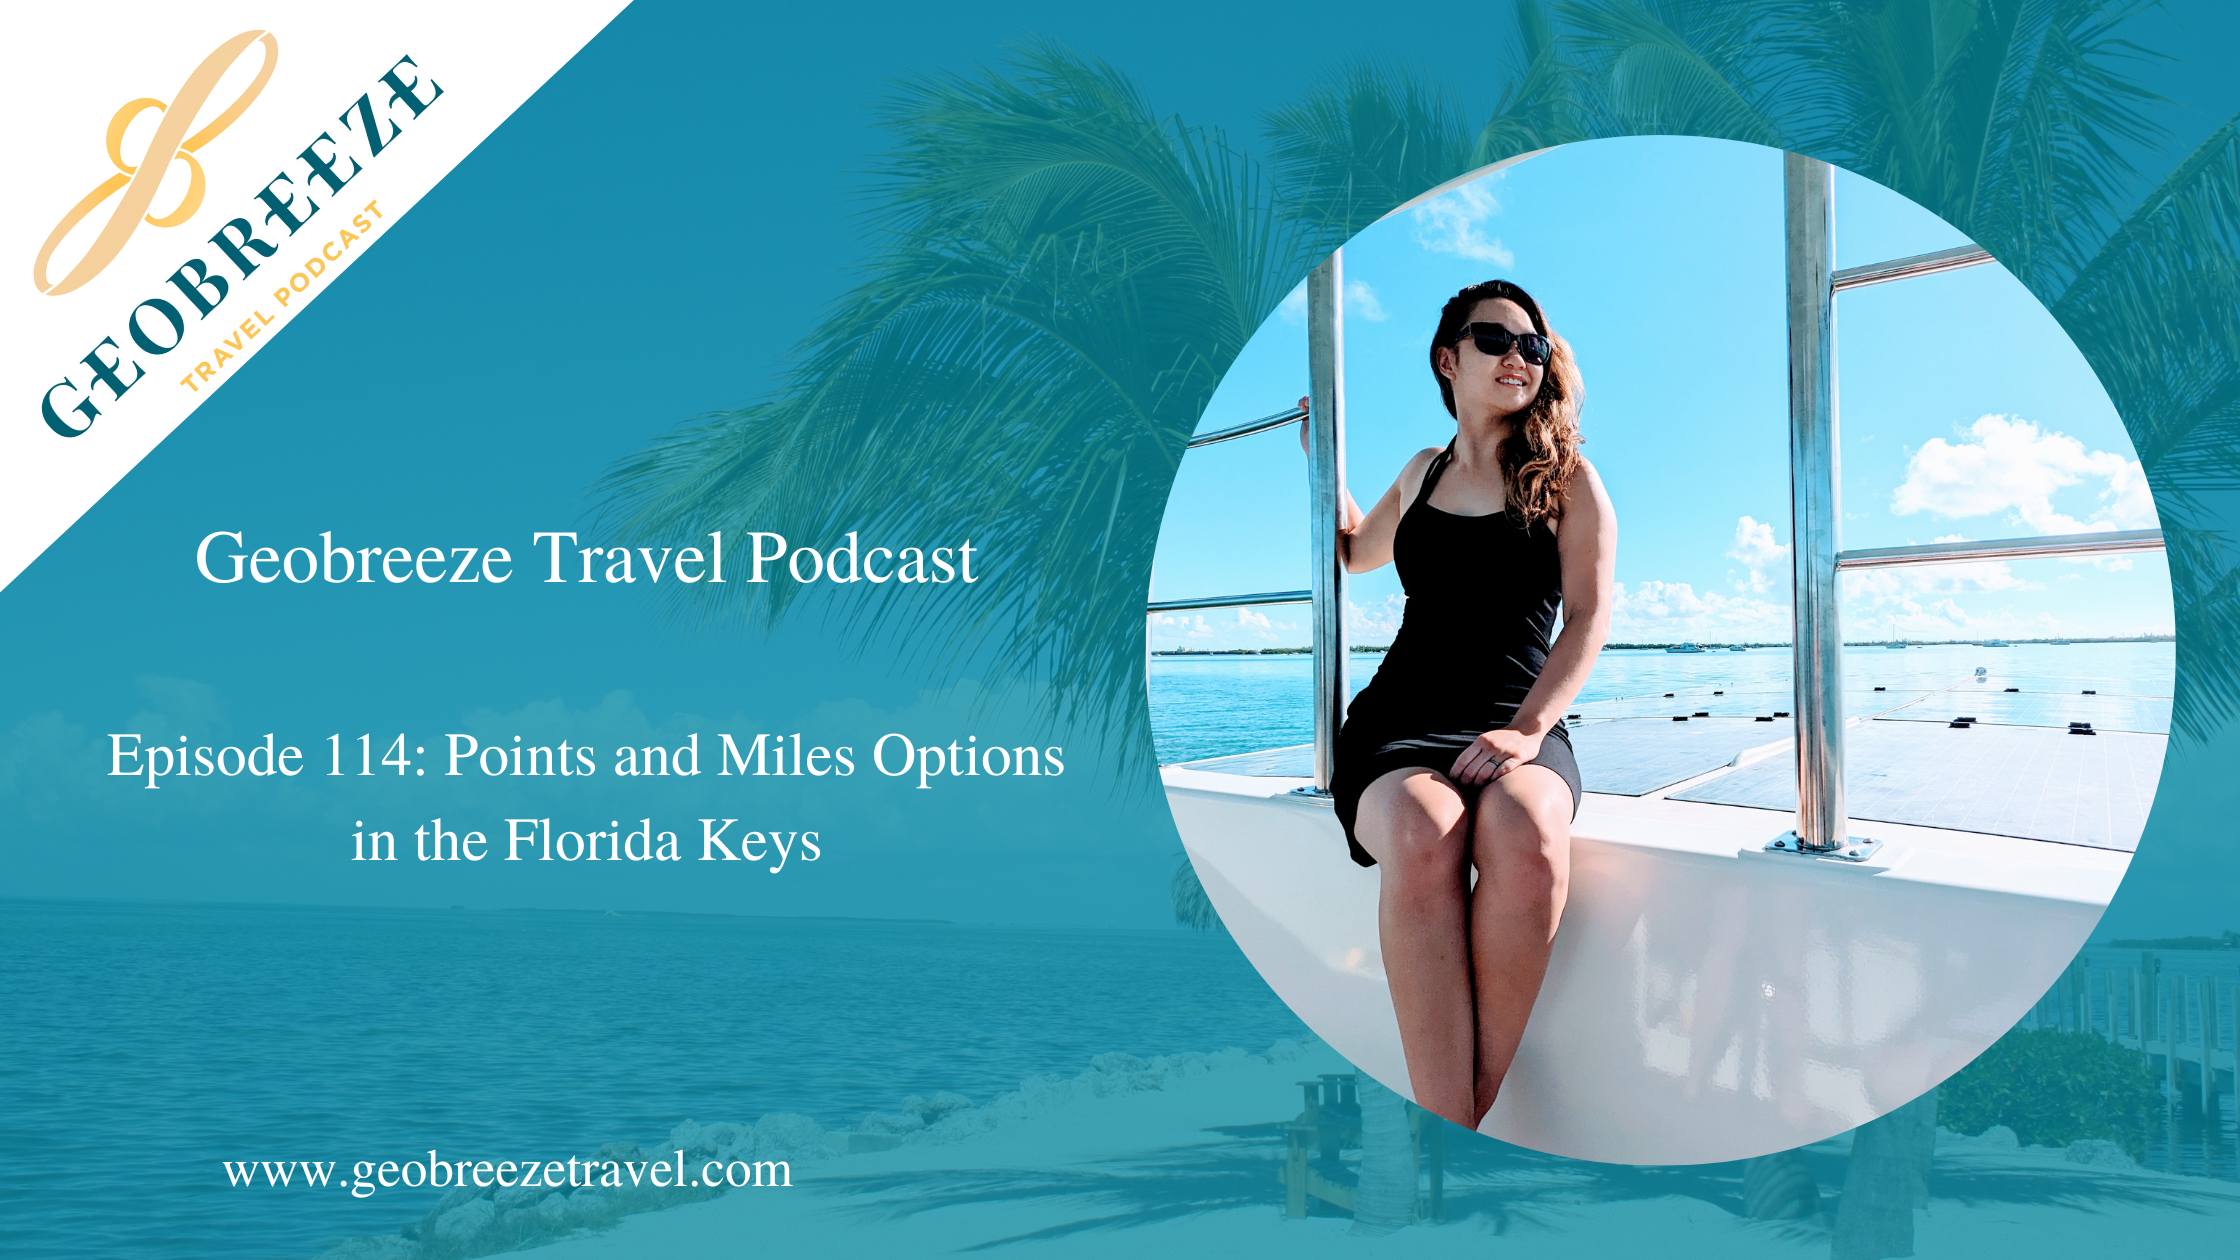 Episode 114: Points and Miles Options in the Florida Keys